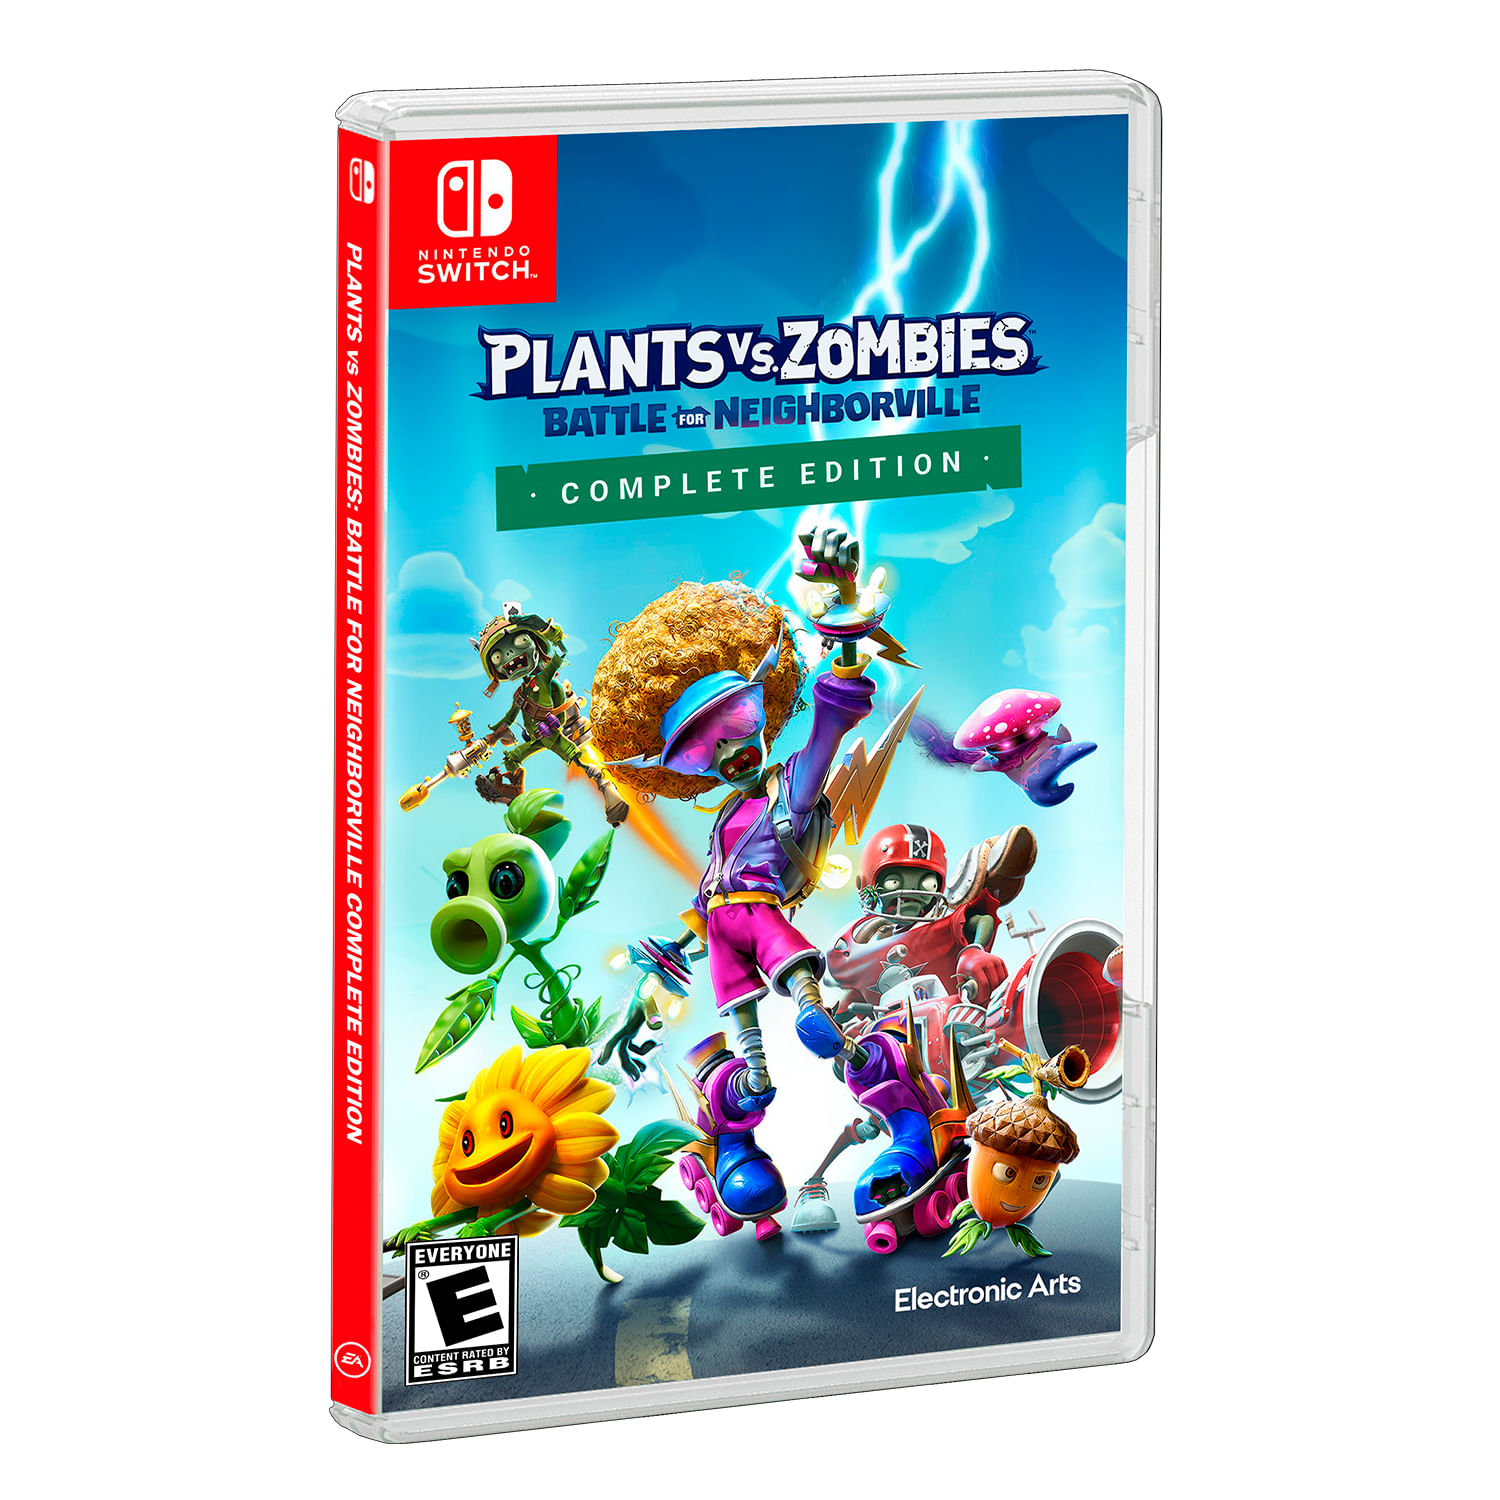 Juego Plants vs Zombies Battle for Neighborville Complete Edition NintendoSwitch